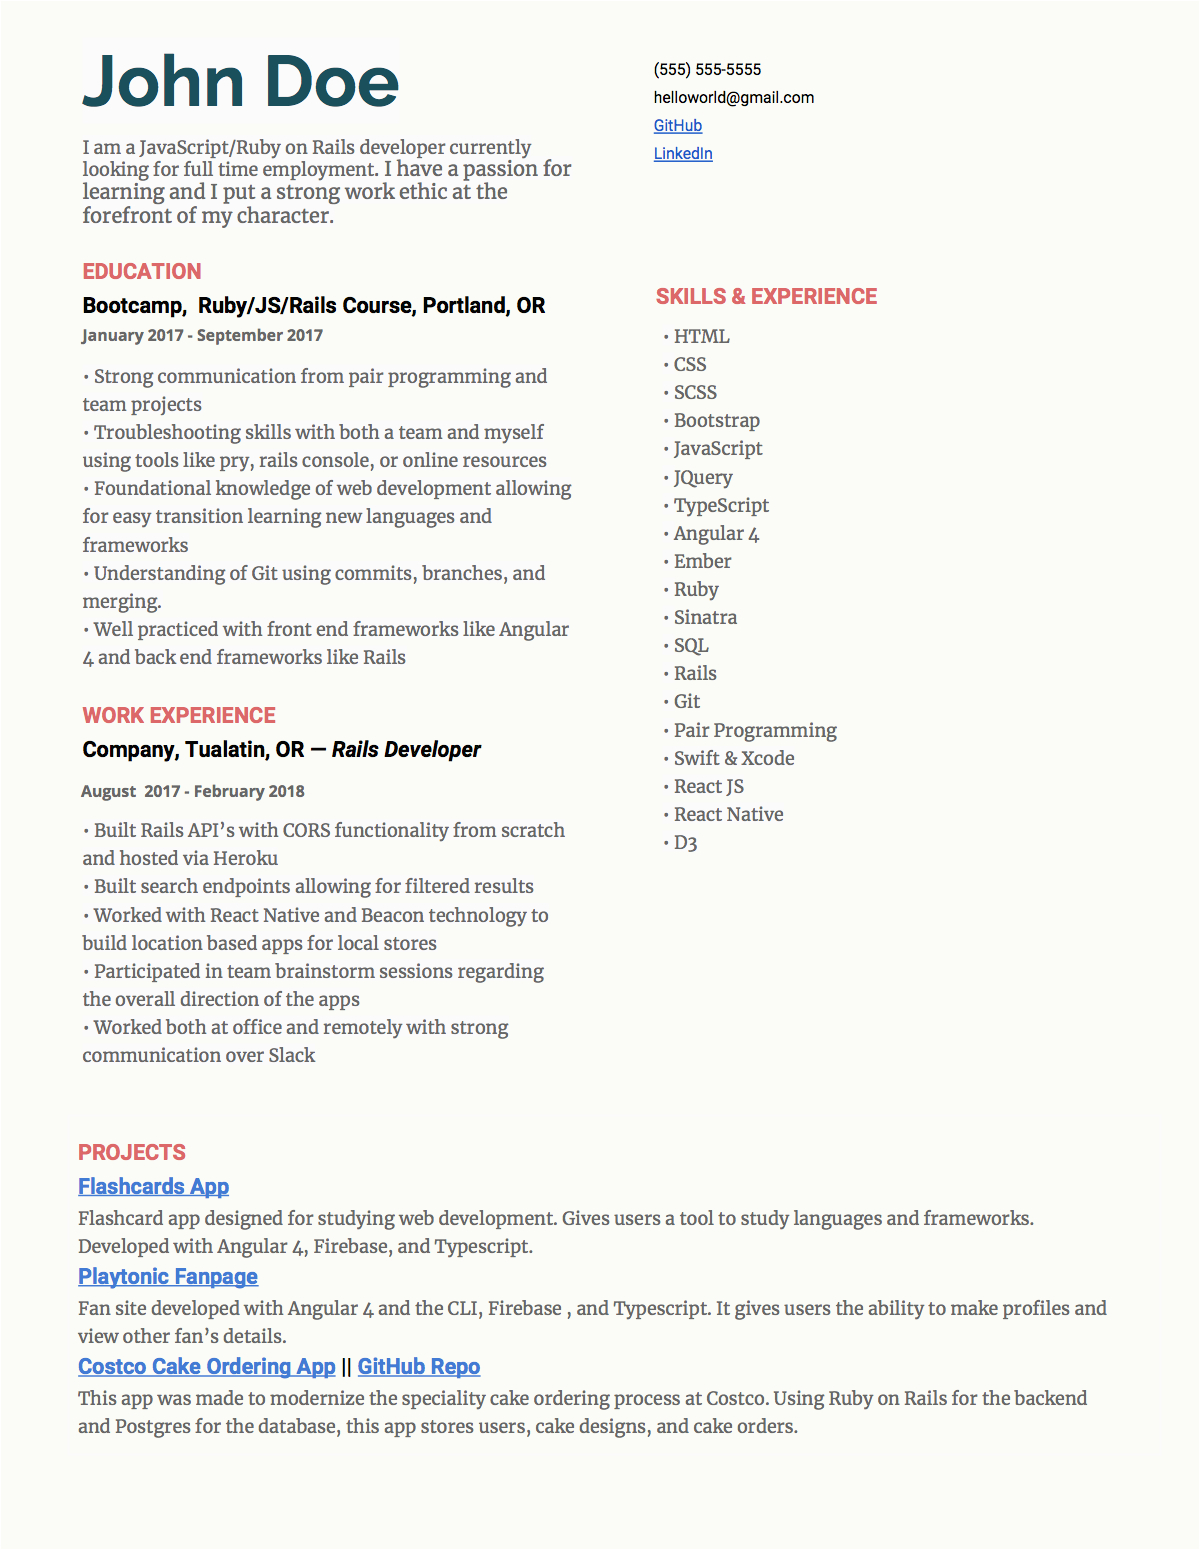 Sample Resume for Net Developer with 2 Year Experience Web Developer 2 Years Experience Tear This Apart Please